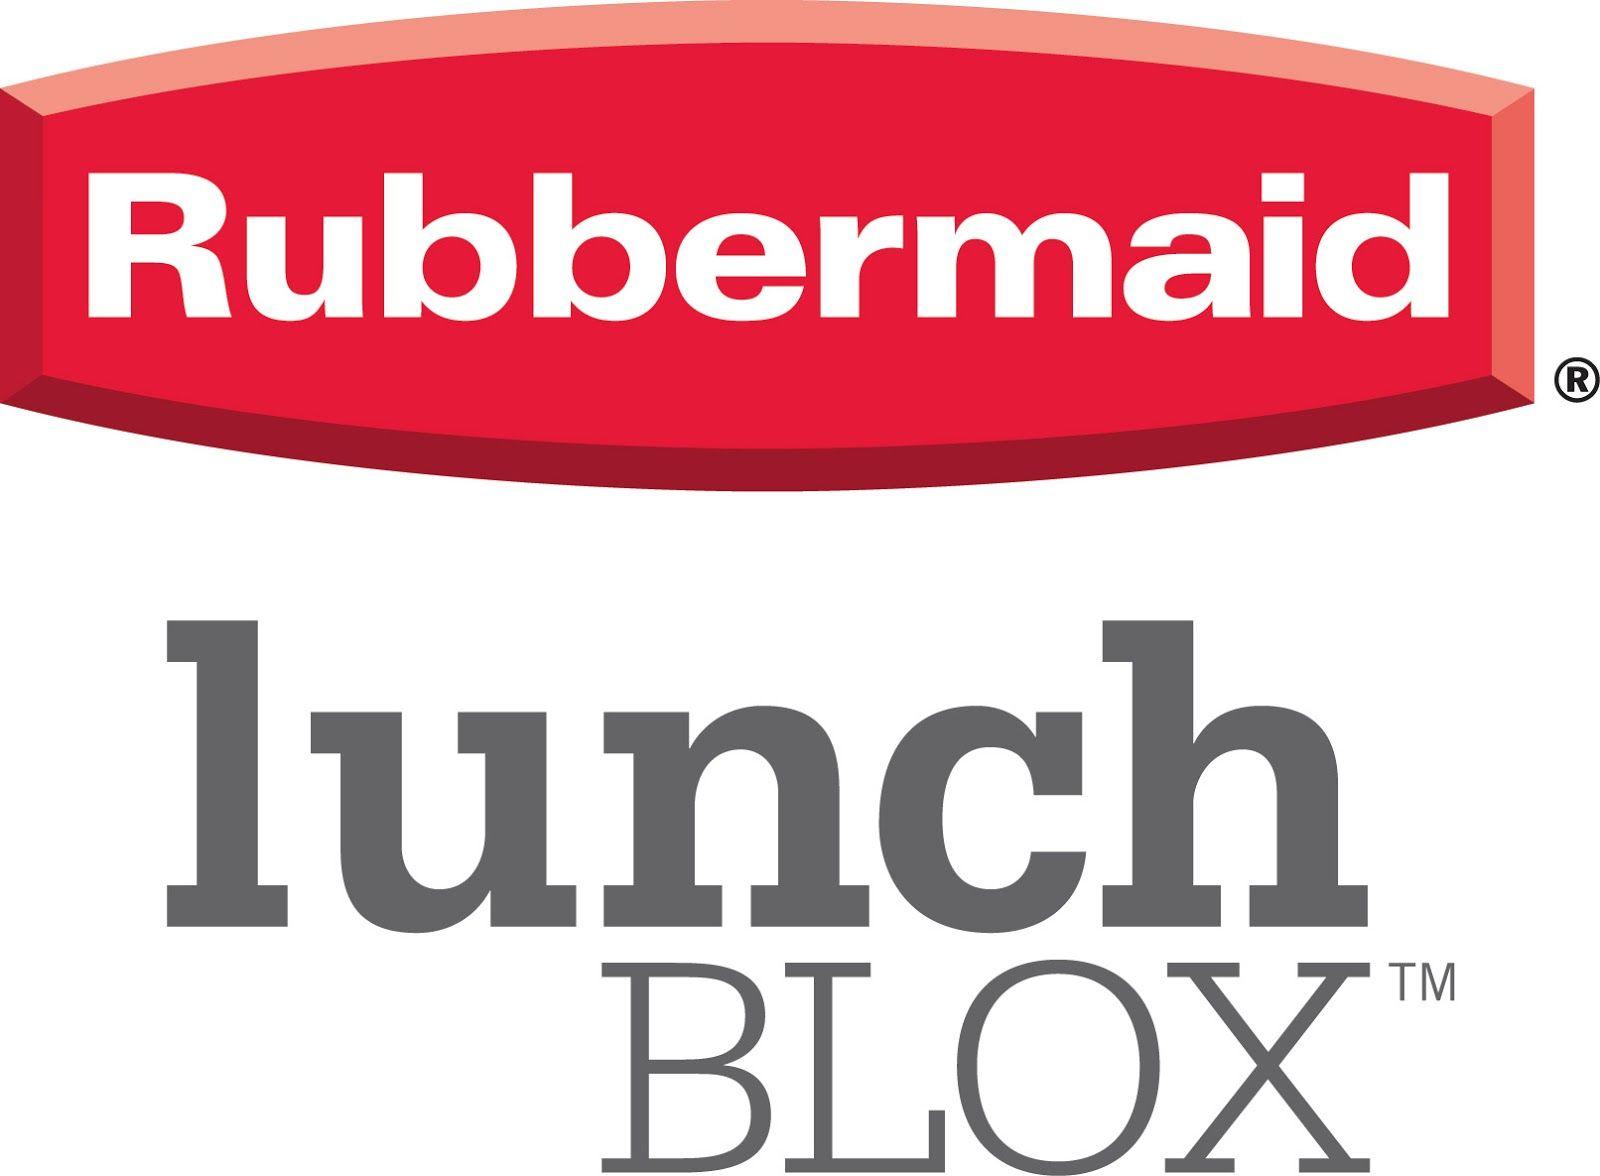 Rubbermaid Logo - Packing a Field Trip Aprroved Snack #ad #BetterInASnap @rubbermaid ...